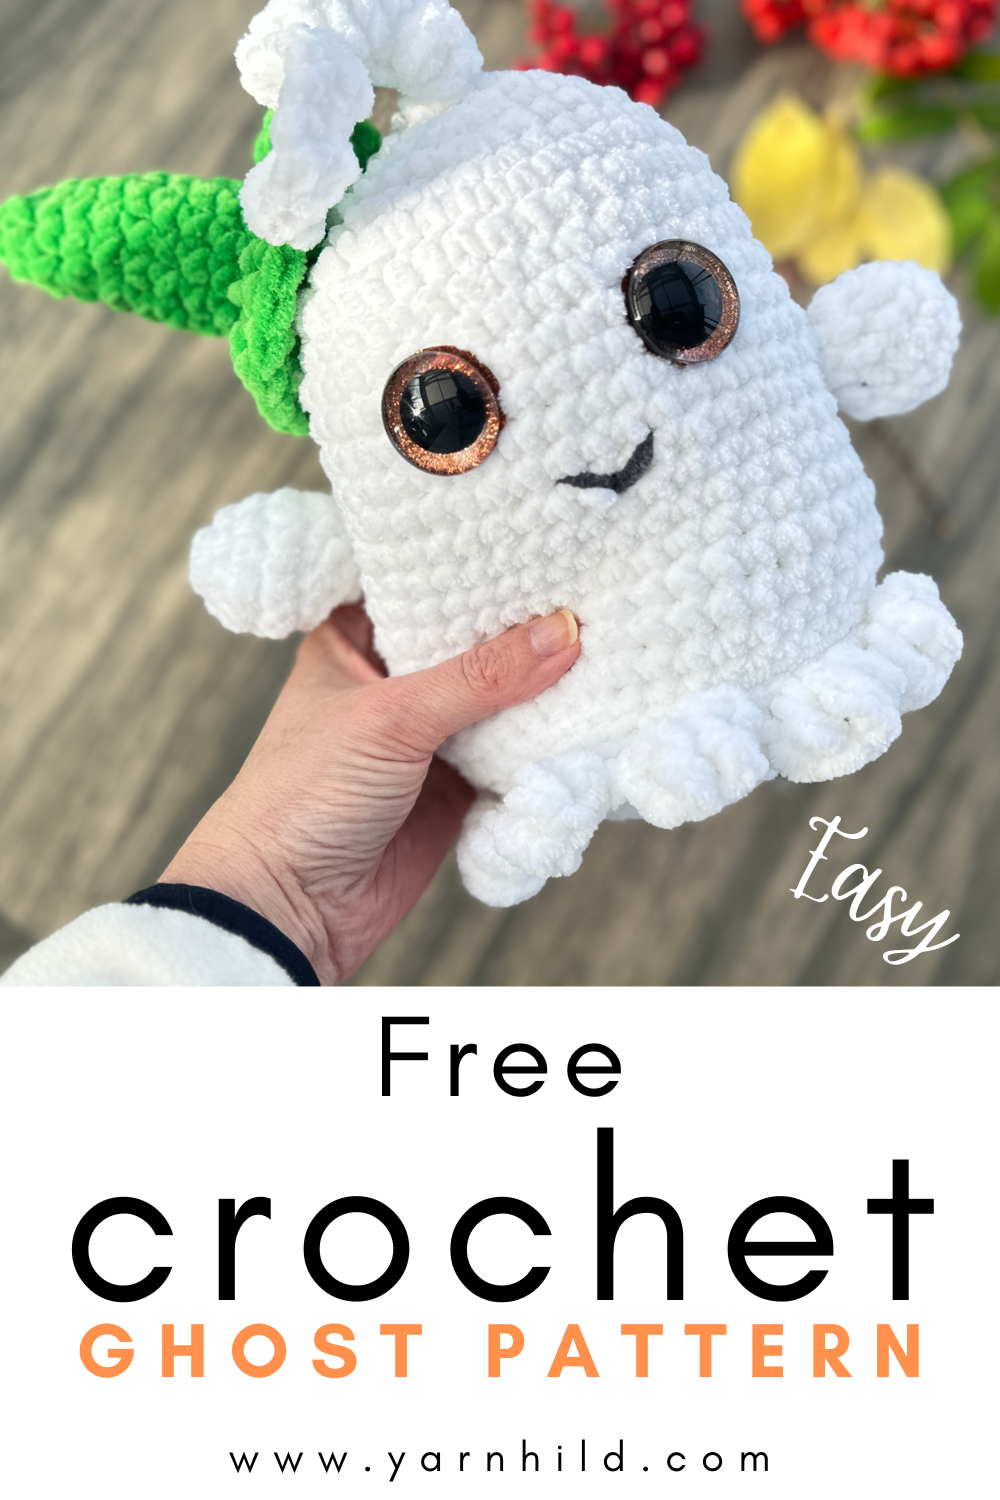 Get ready for some crochet magic! Our Cute Amigurumi Ghost Pattern is the perfect blend of spooky and cuddly. Craft your own charming ghost in no time. It's a whimsical addition to your handmade collection and a fantastic gift idea. Download the pattern today and let the hauntingly cute creations begin! 👻🧶 #CrochetPatterns #Amigurumi #HalloweenCrafts